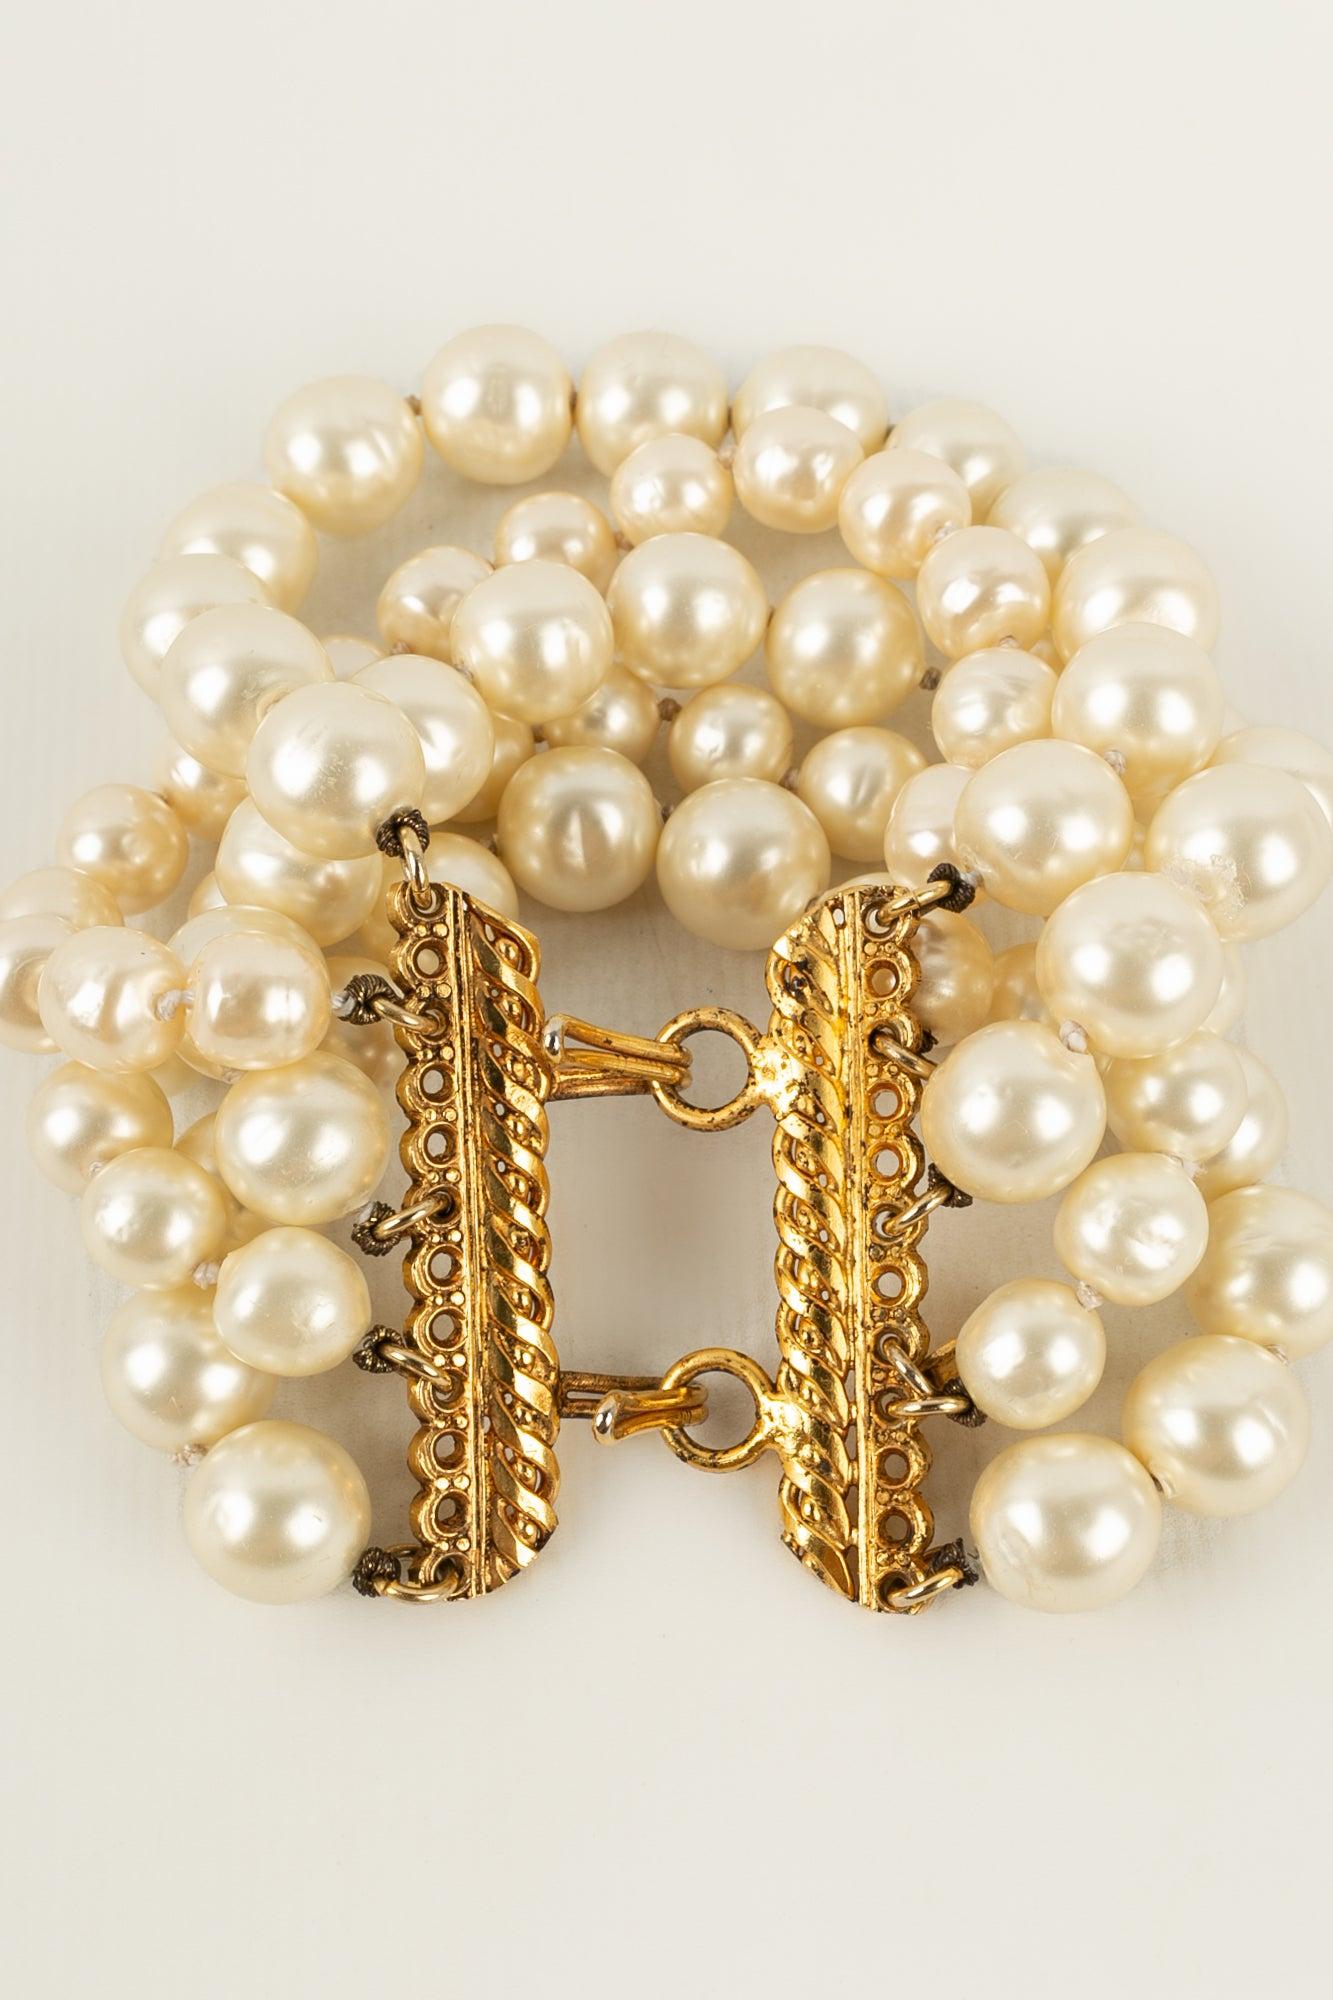 Chanel Bracelet with Pearly Beads and a Fastener in Golden Metal, 1980s In Good Condition For Sale In SAINT-OUEN-SUR-SEINE, FR